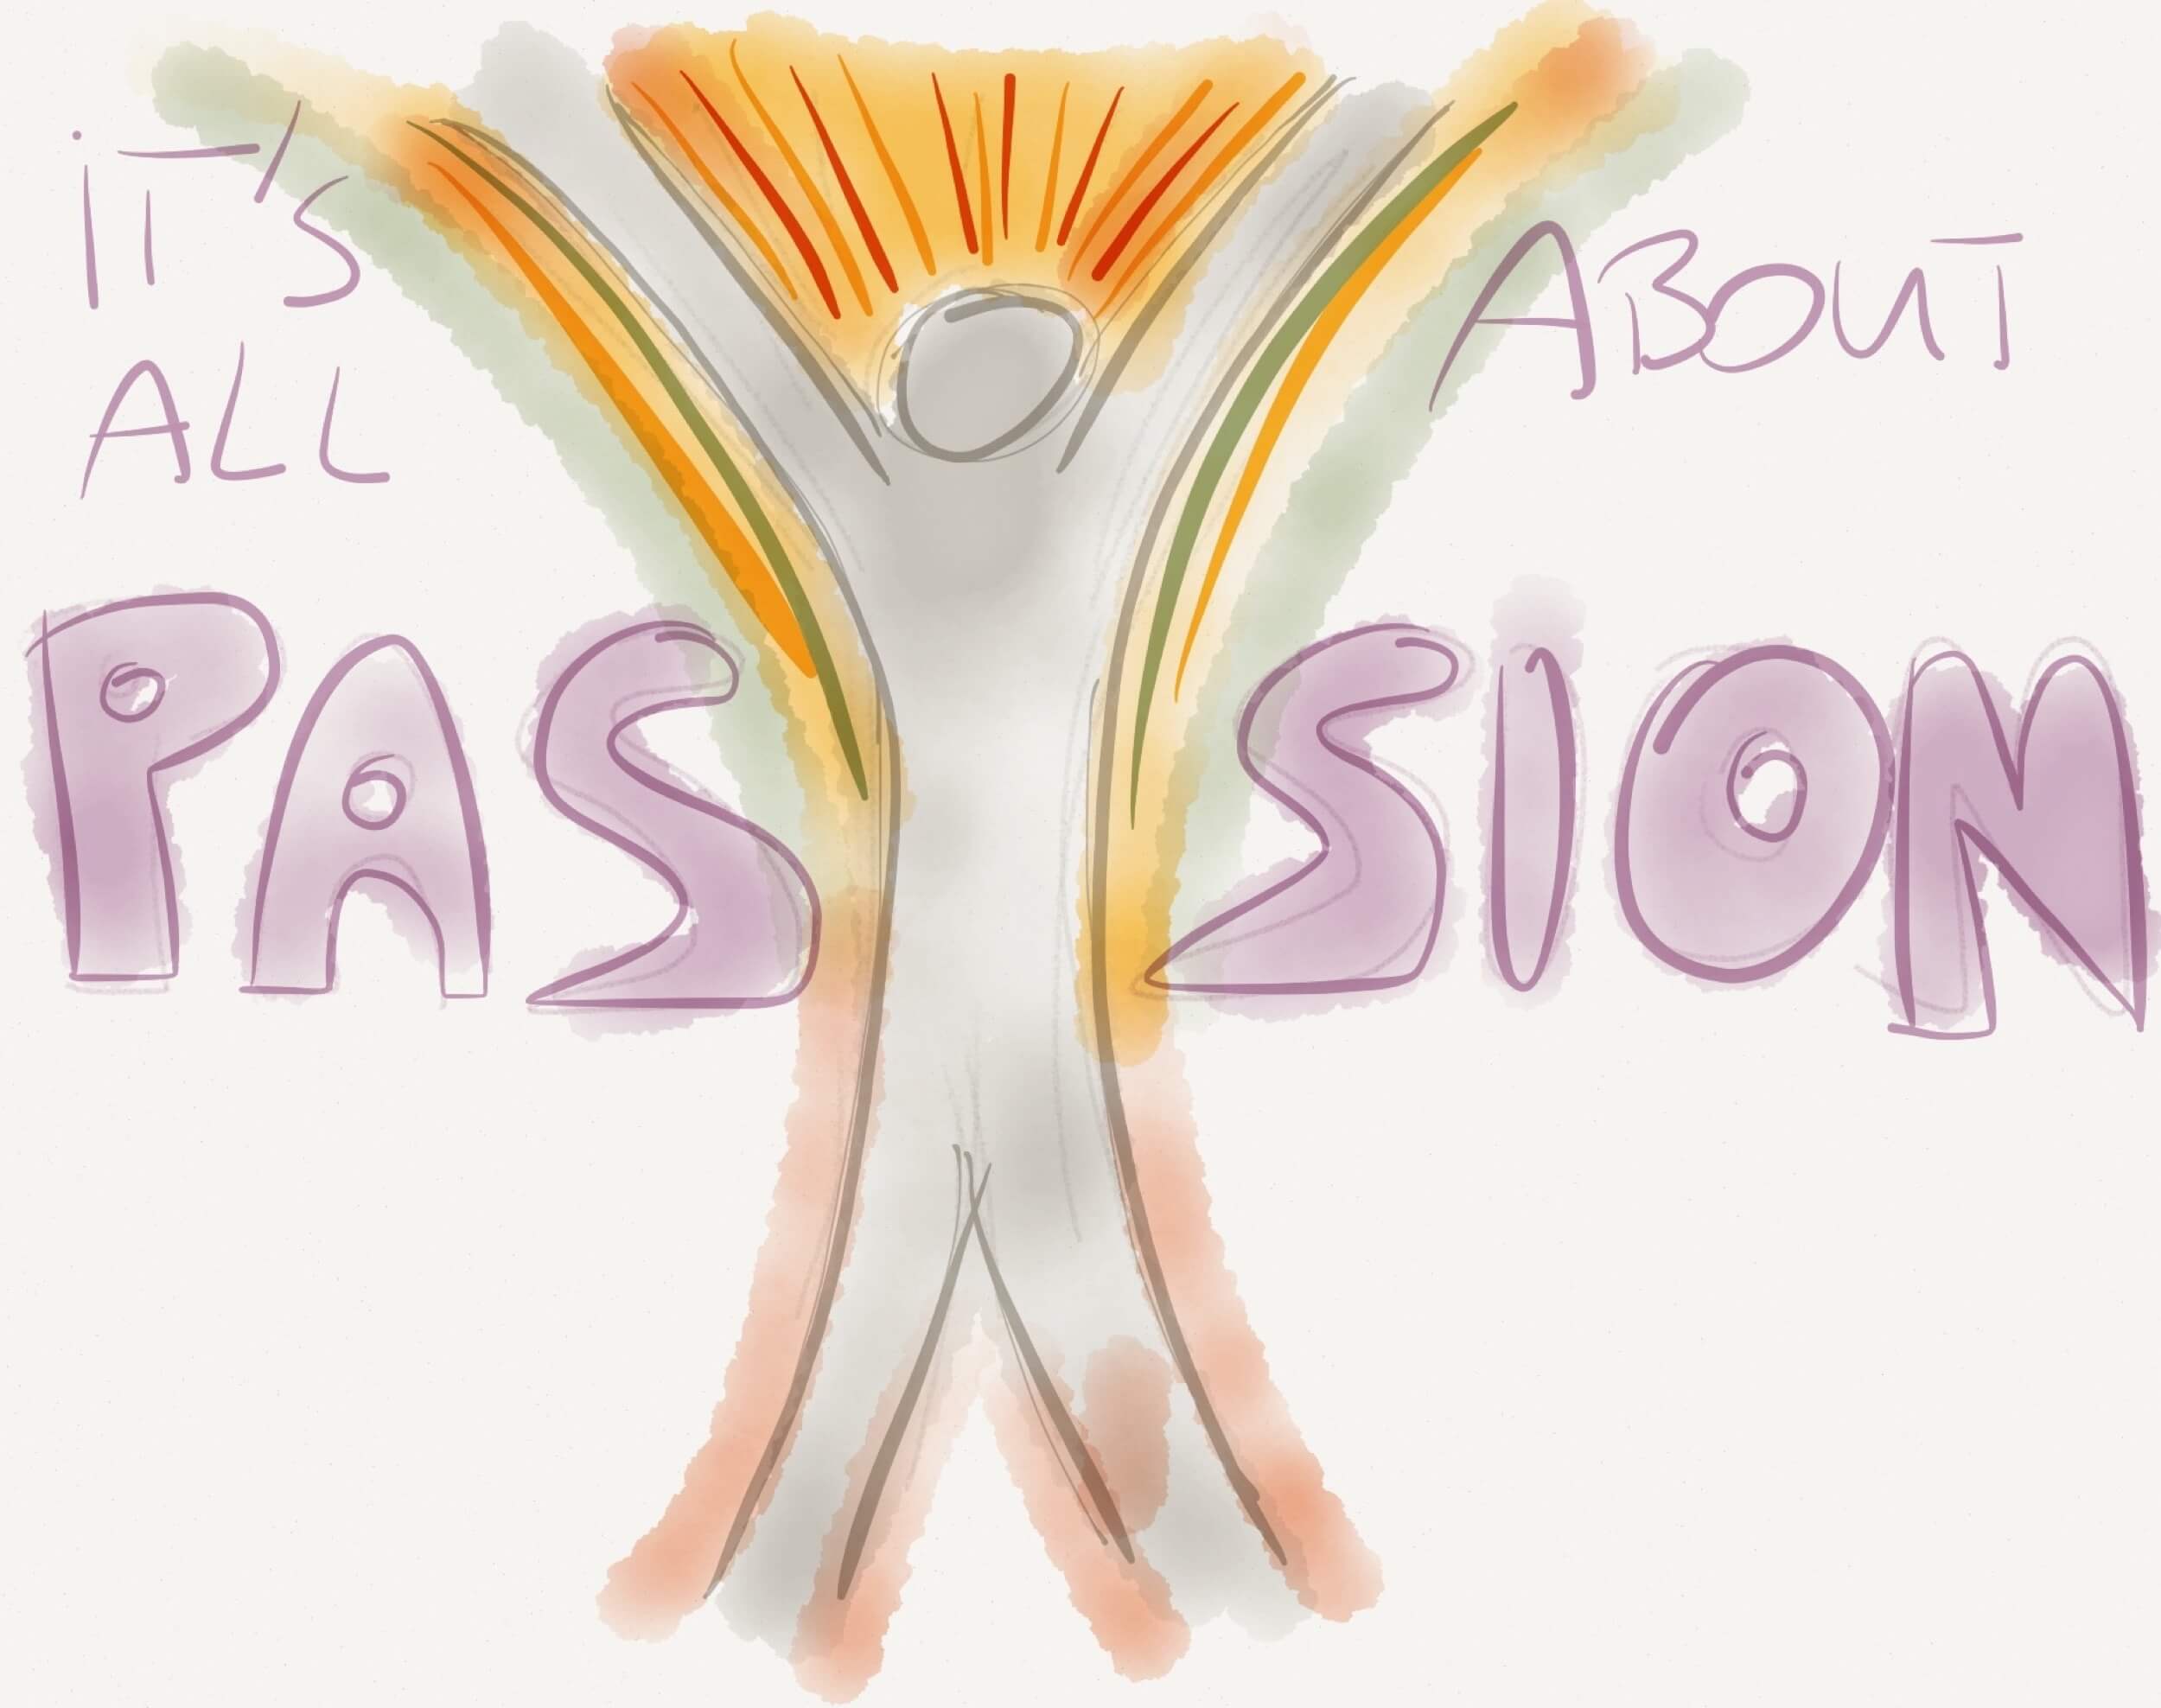 Build a passionate startup!… or 7 types of passion